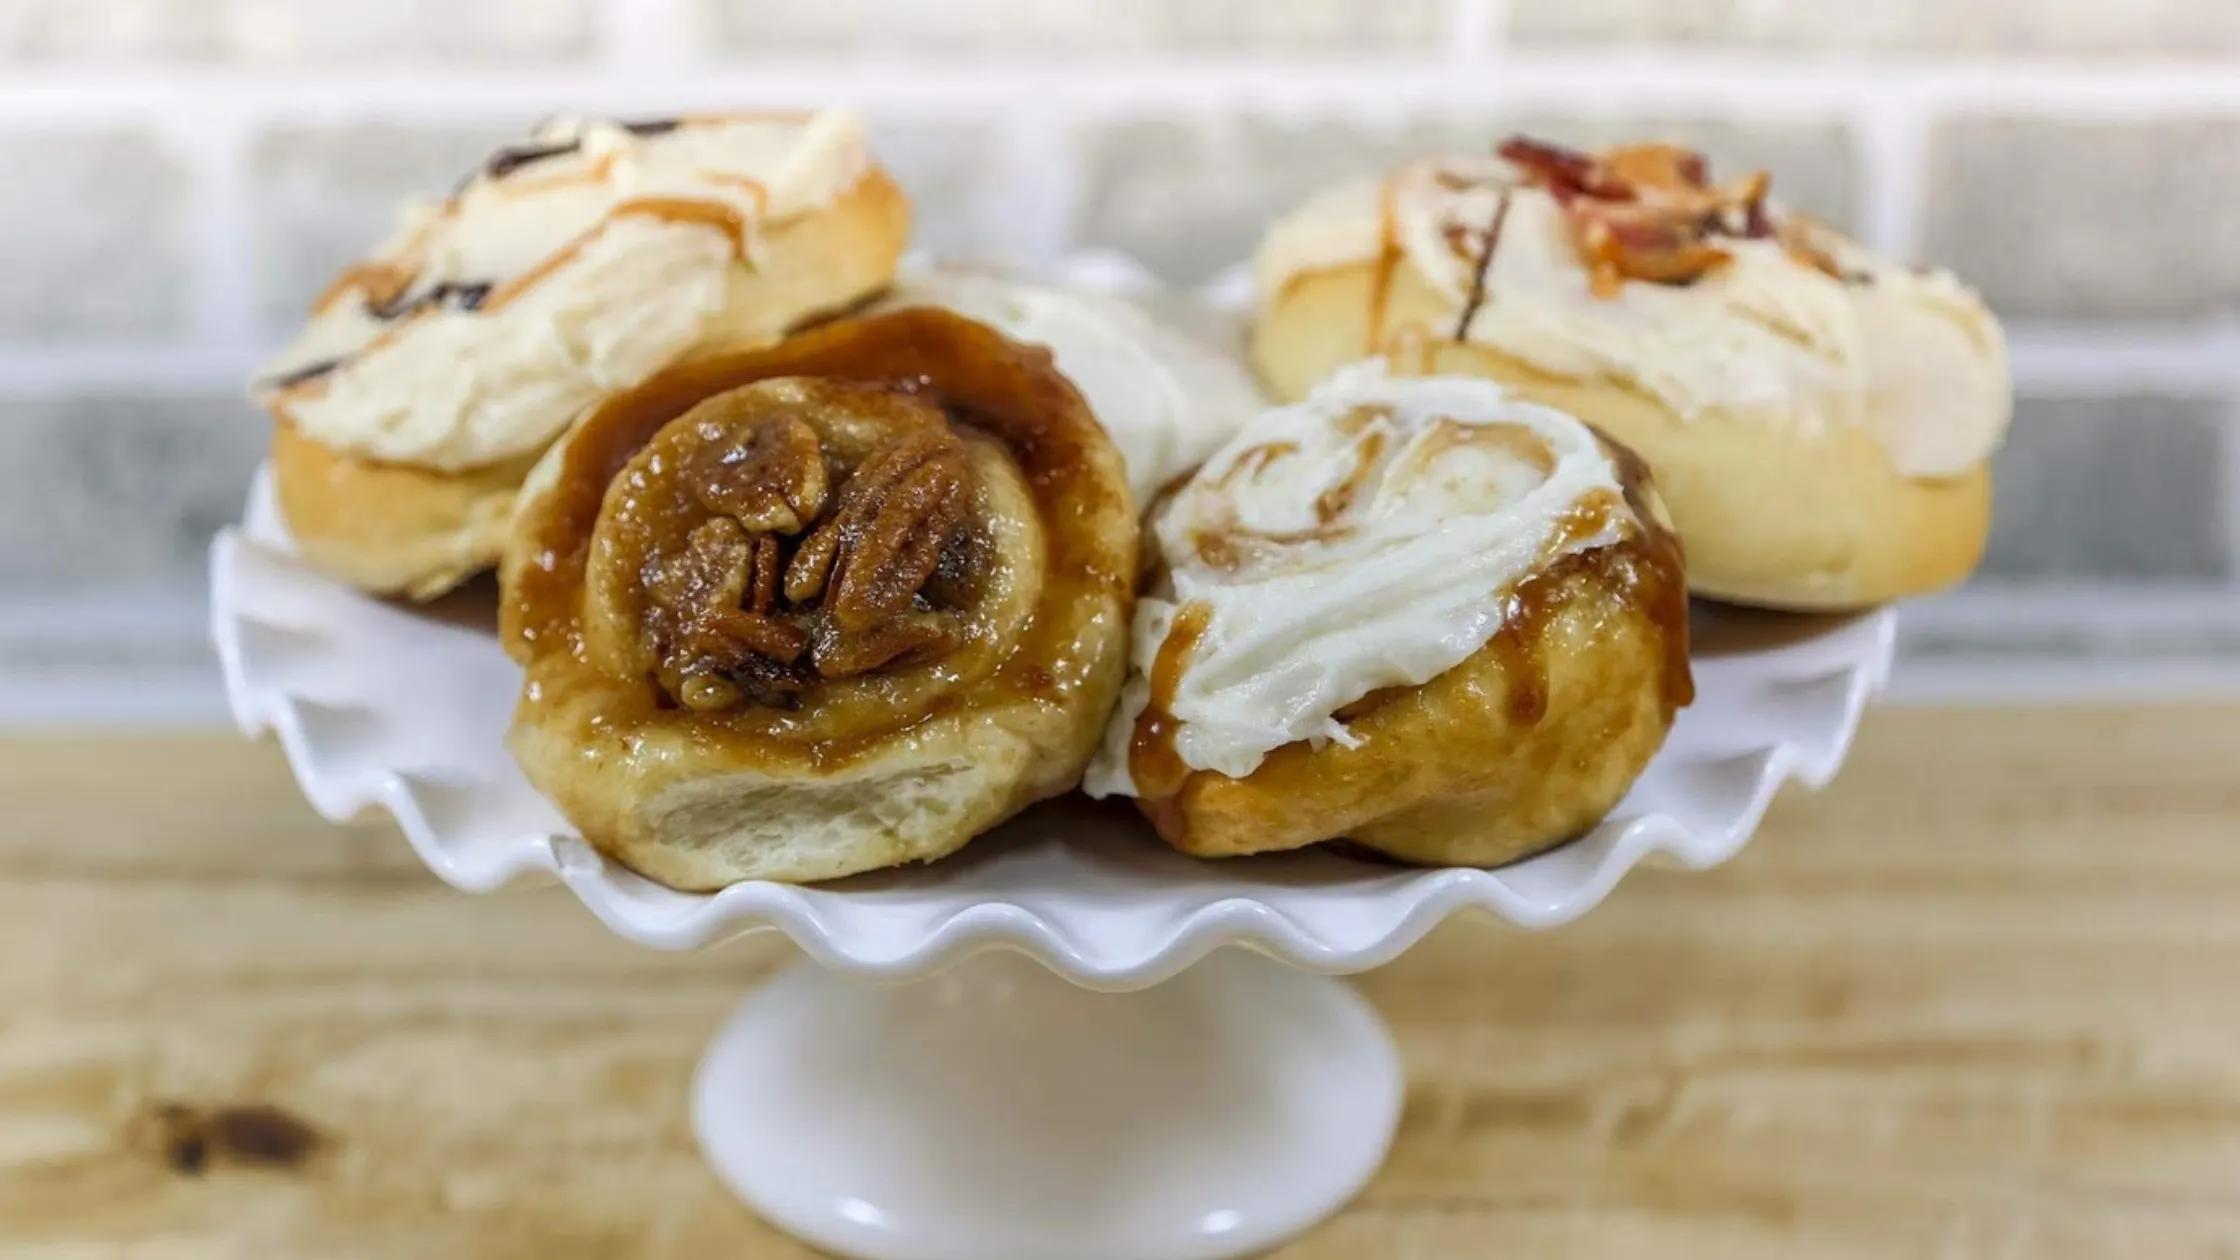 smoked cinnamon rolls - What is the difference between cinnamon bun and cinnamon roll